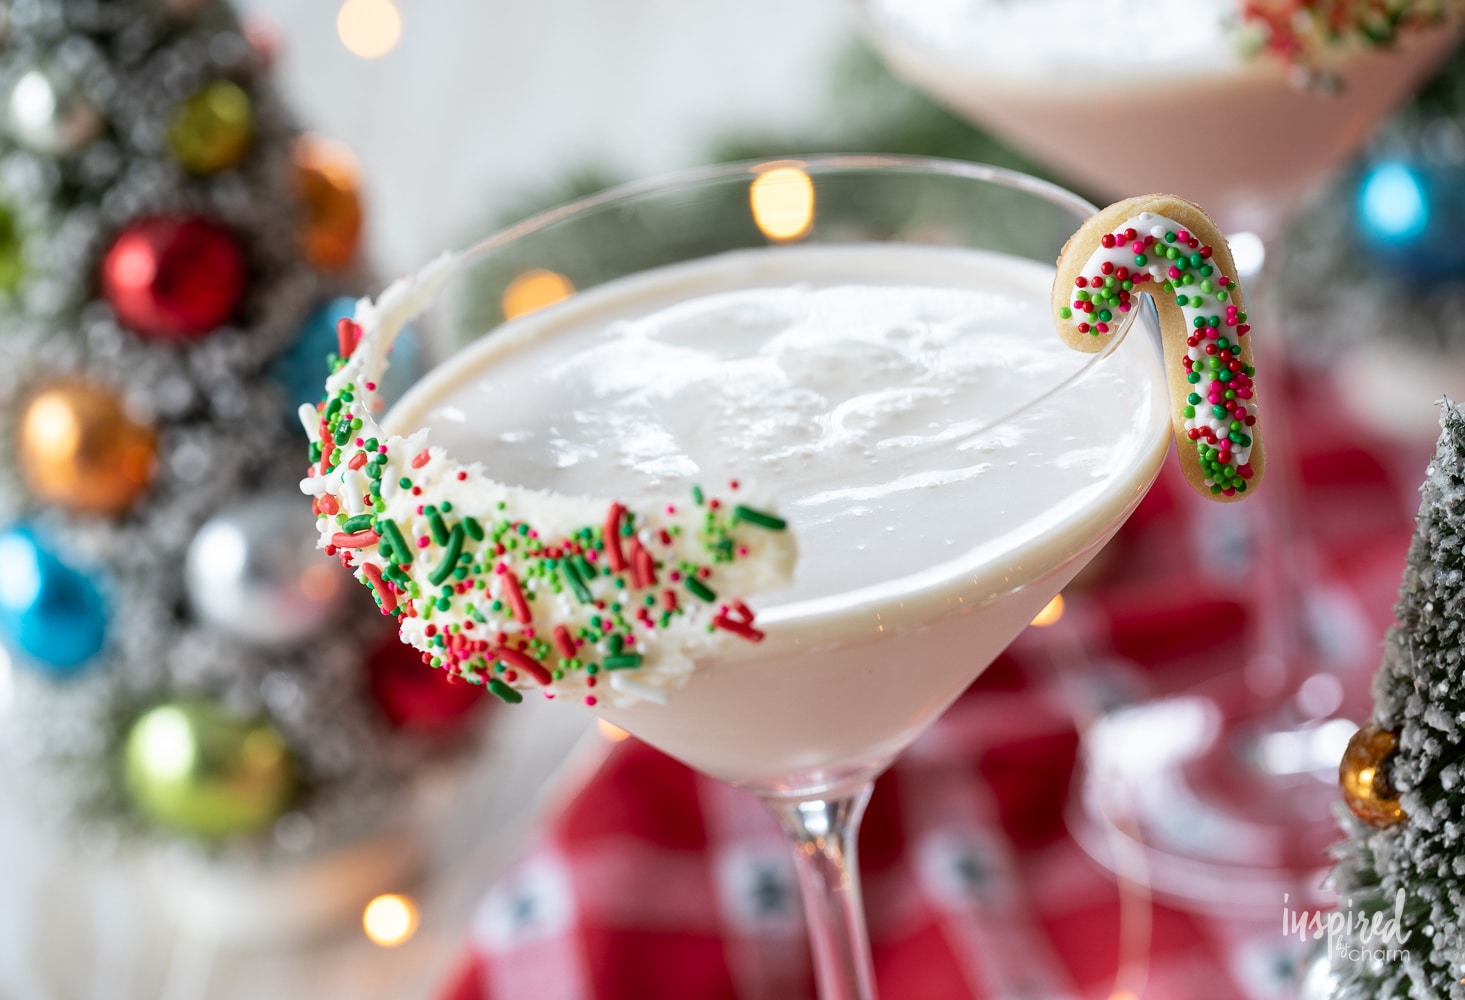 sugar cookie Martin in a glass with a candy cane cookie garnish.